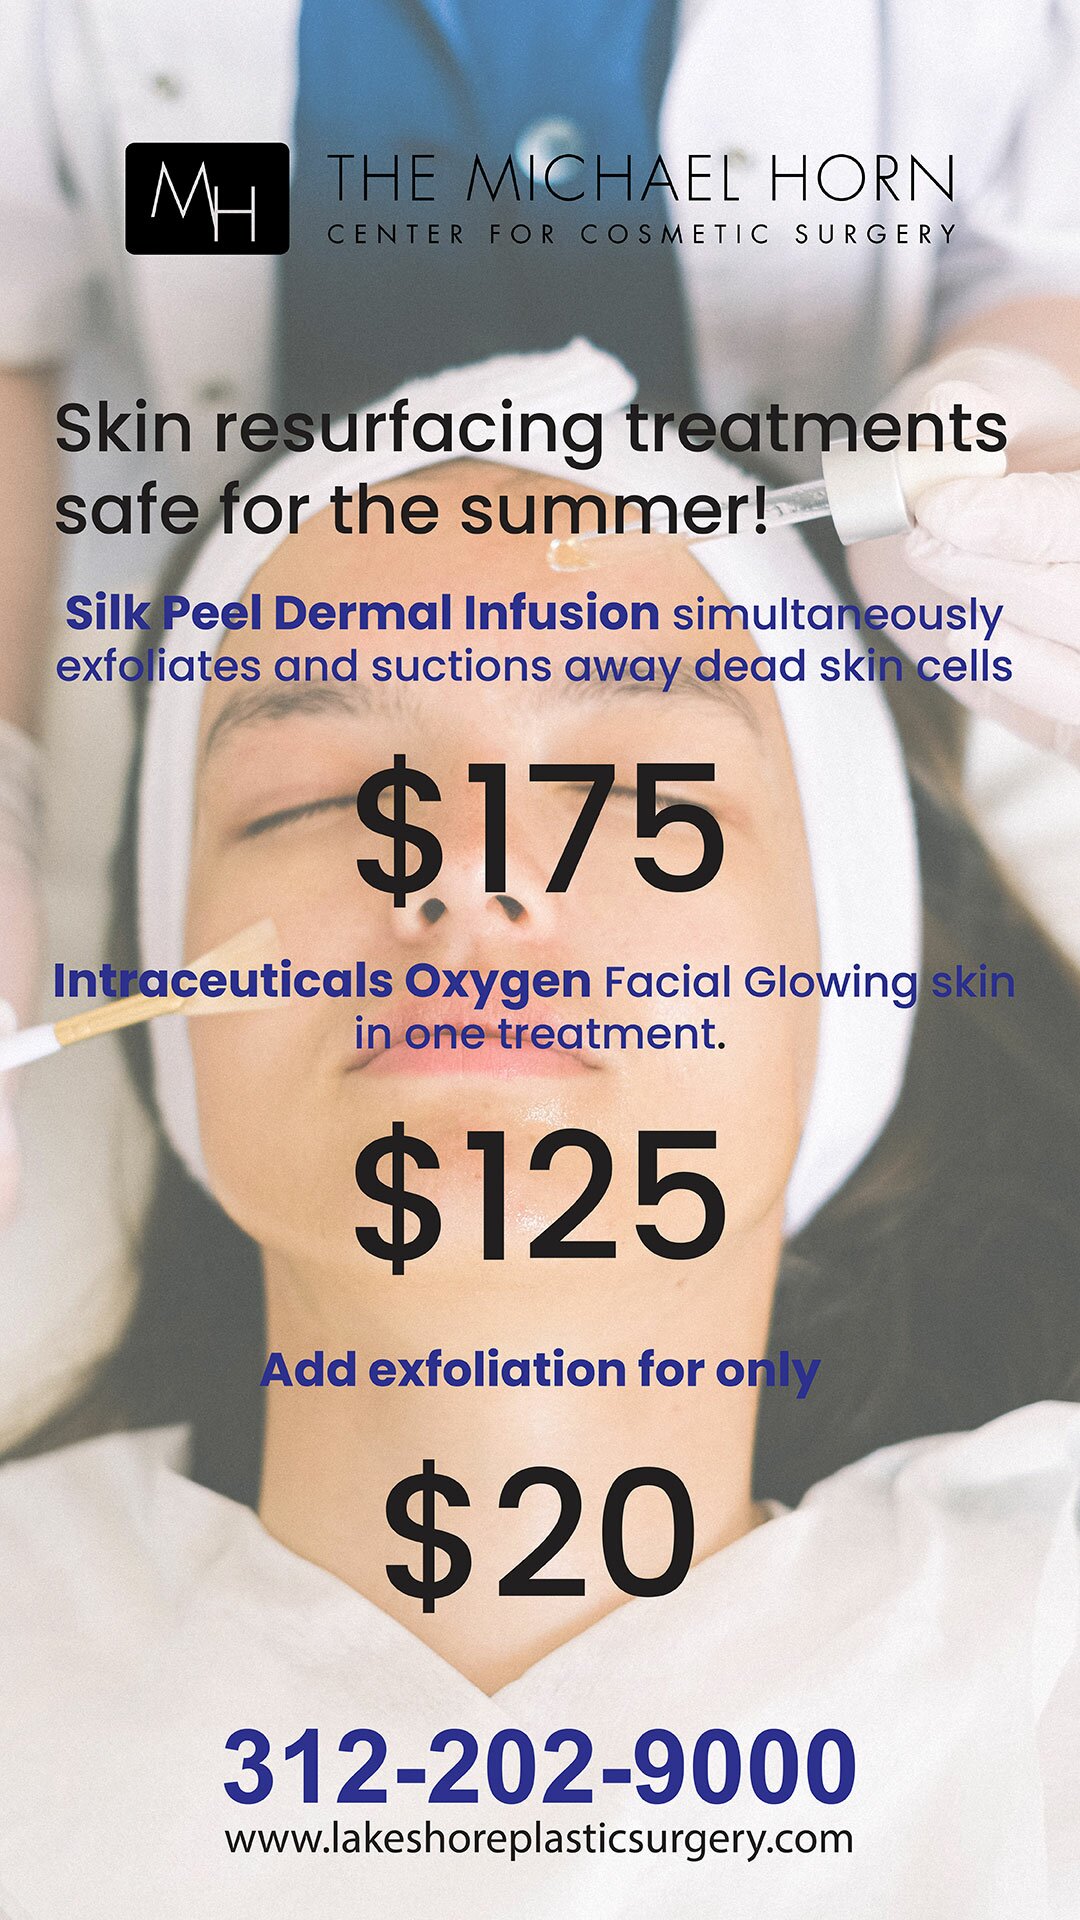 Special Offer - Skin Resurfacing Treatments